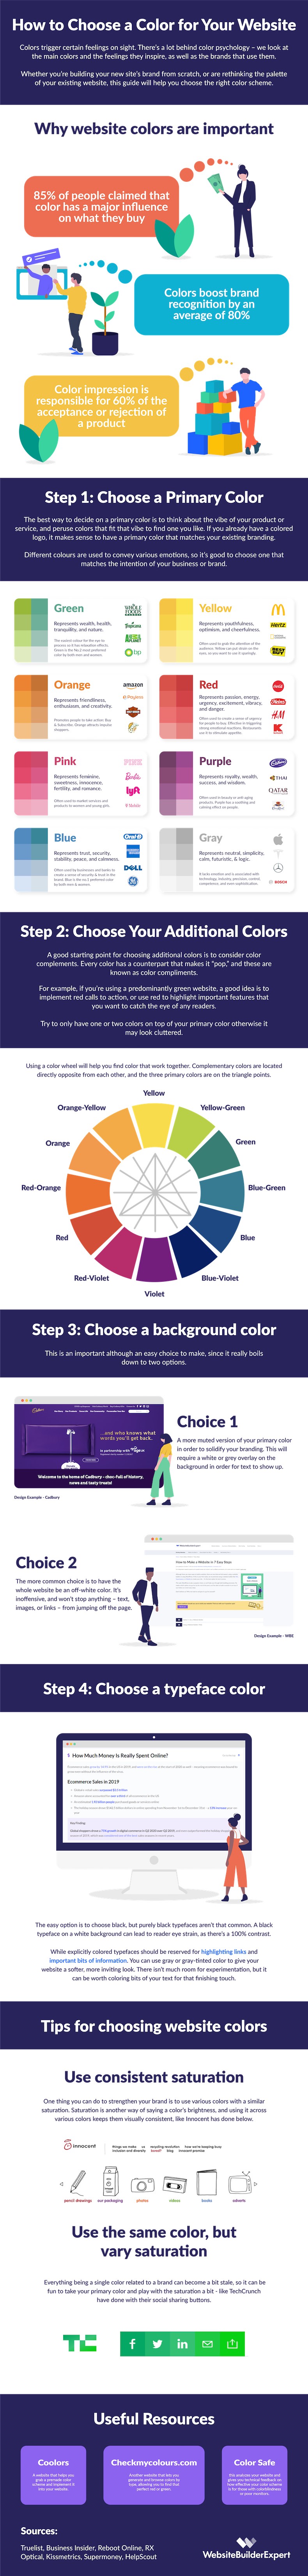 How to choose a color for your website infographic